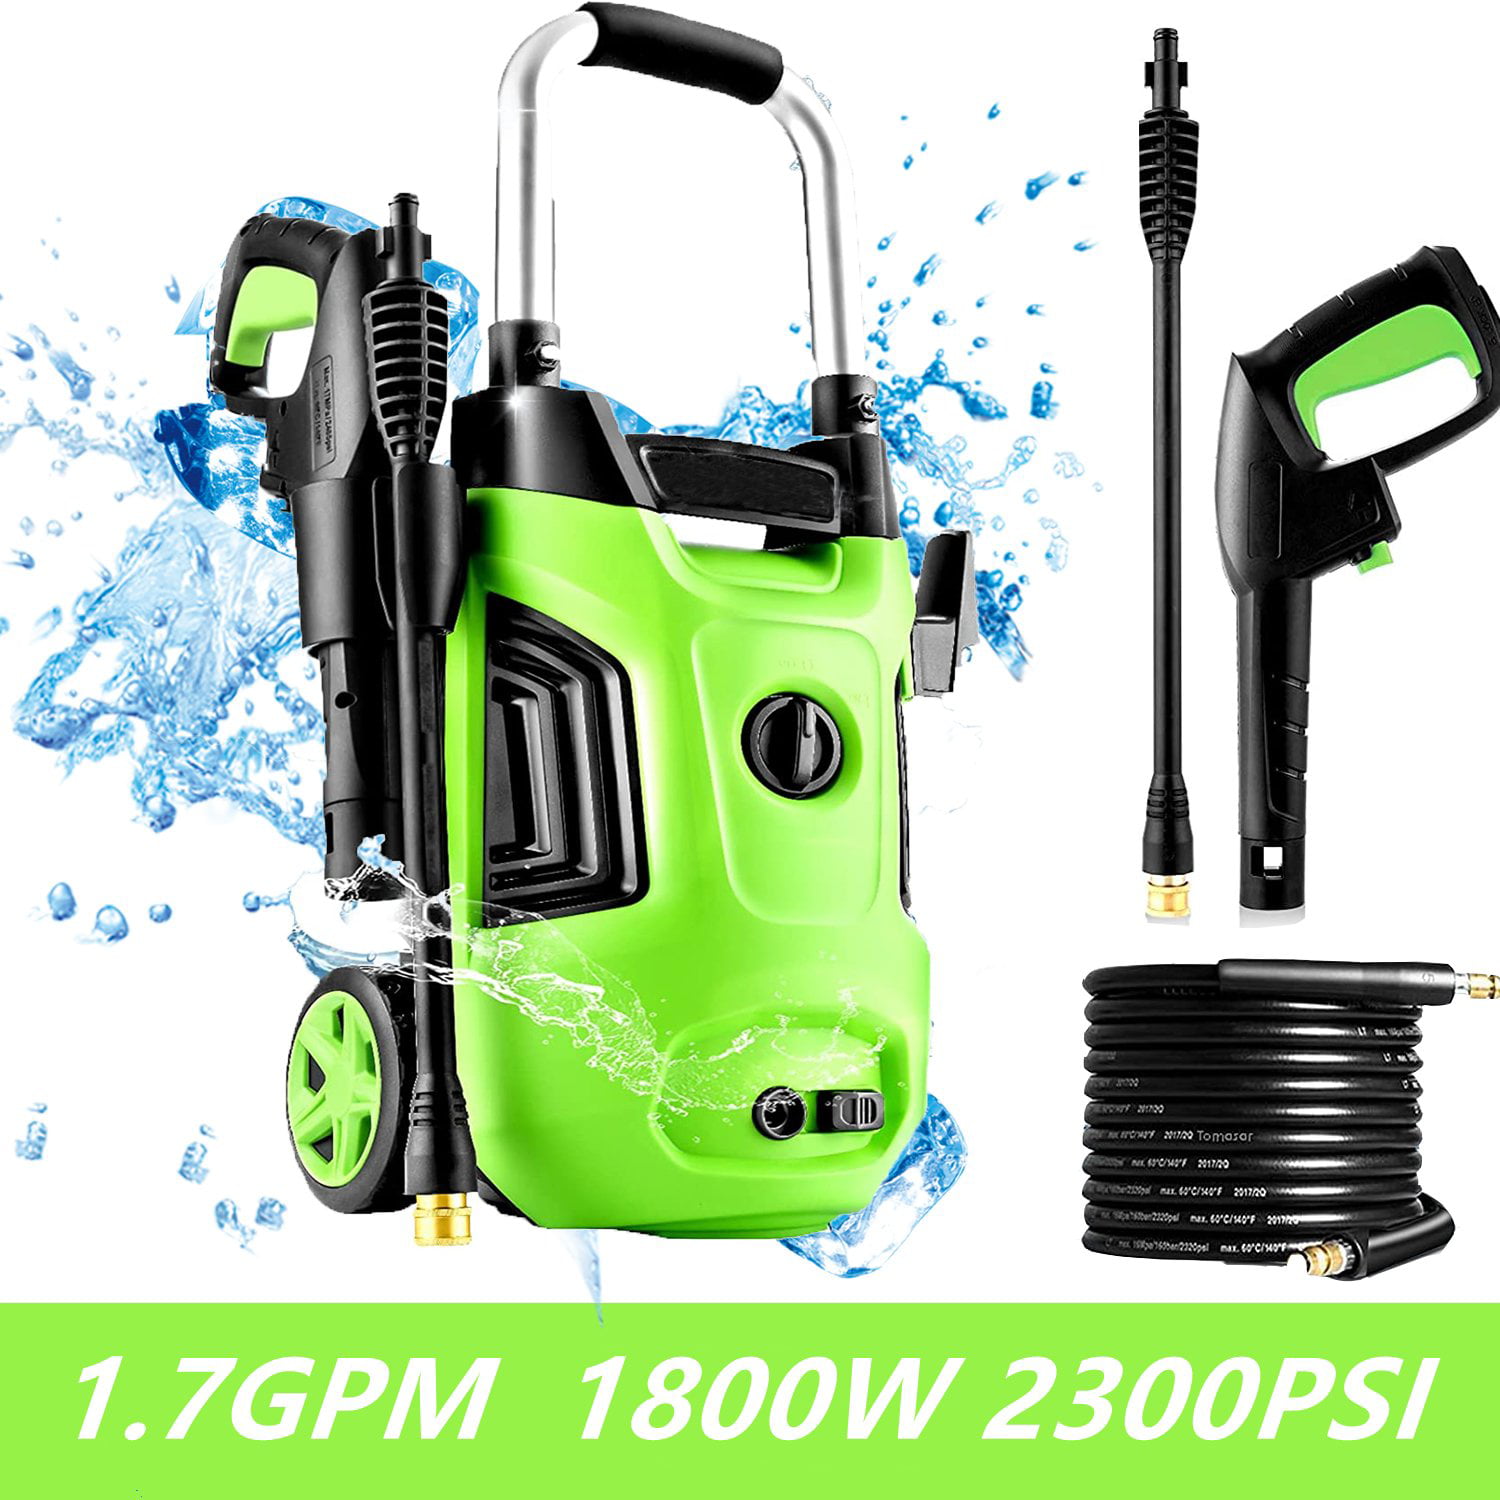 Patio Homdox 2300 PSI Electric Pressure Washer 1400 W Power Washer 2.2GPM Compact High Pressure Cleaner with Adjustable Spray Nozzles Foam Cannon for Home Driveway Car 